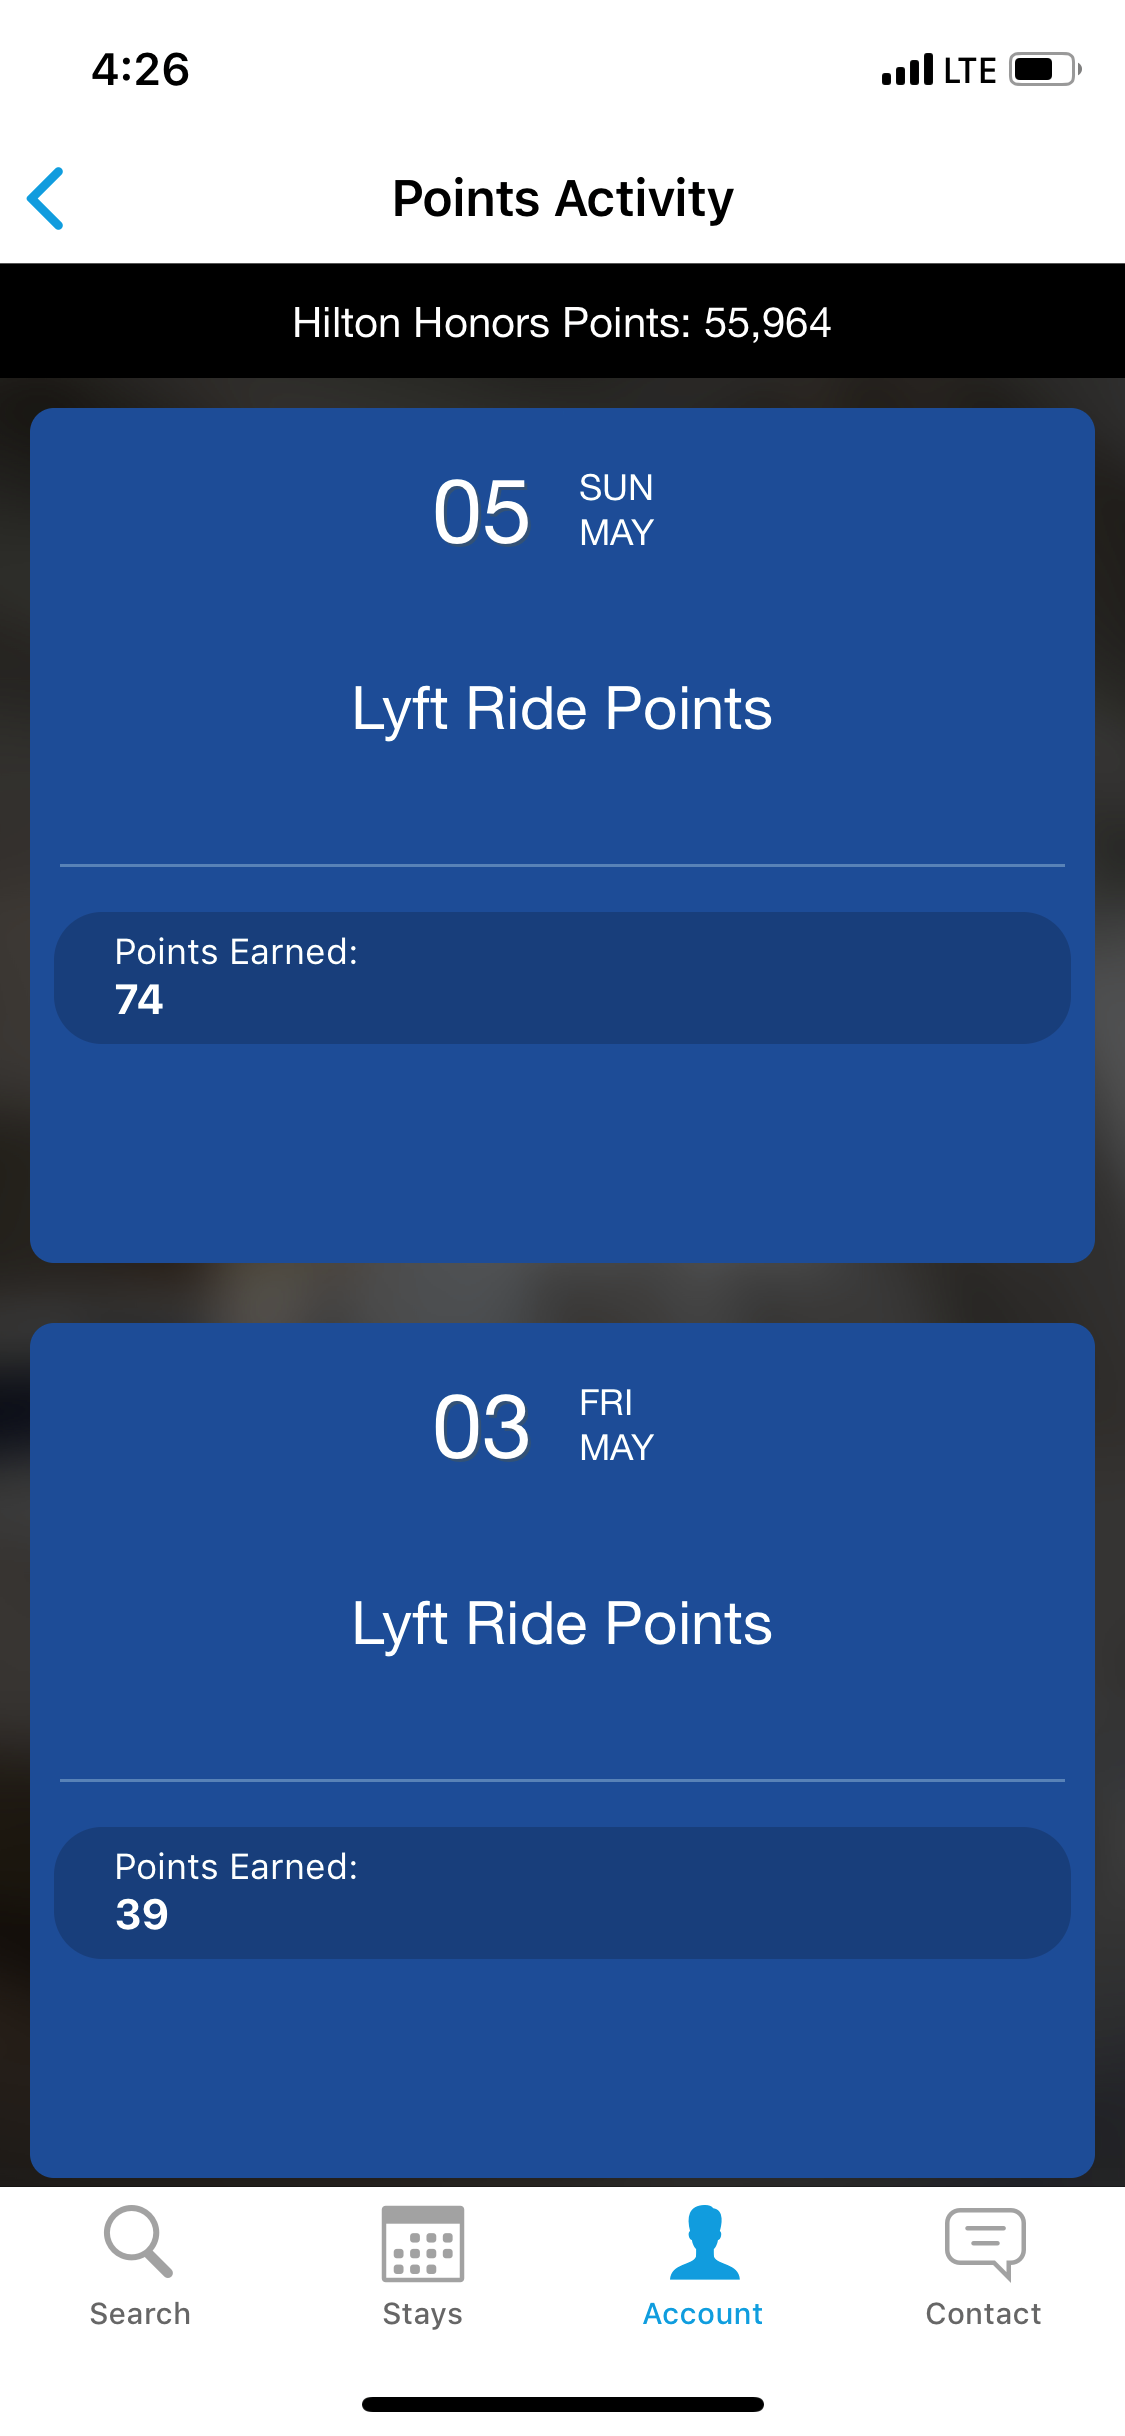 earn hilton points with lyft rides